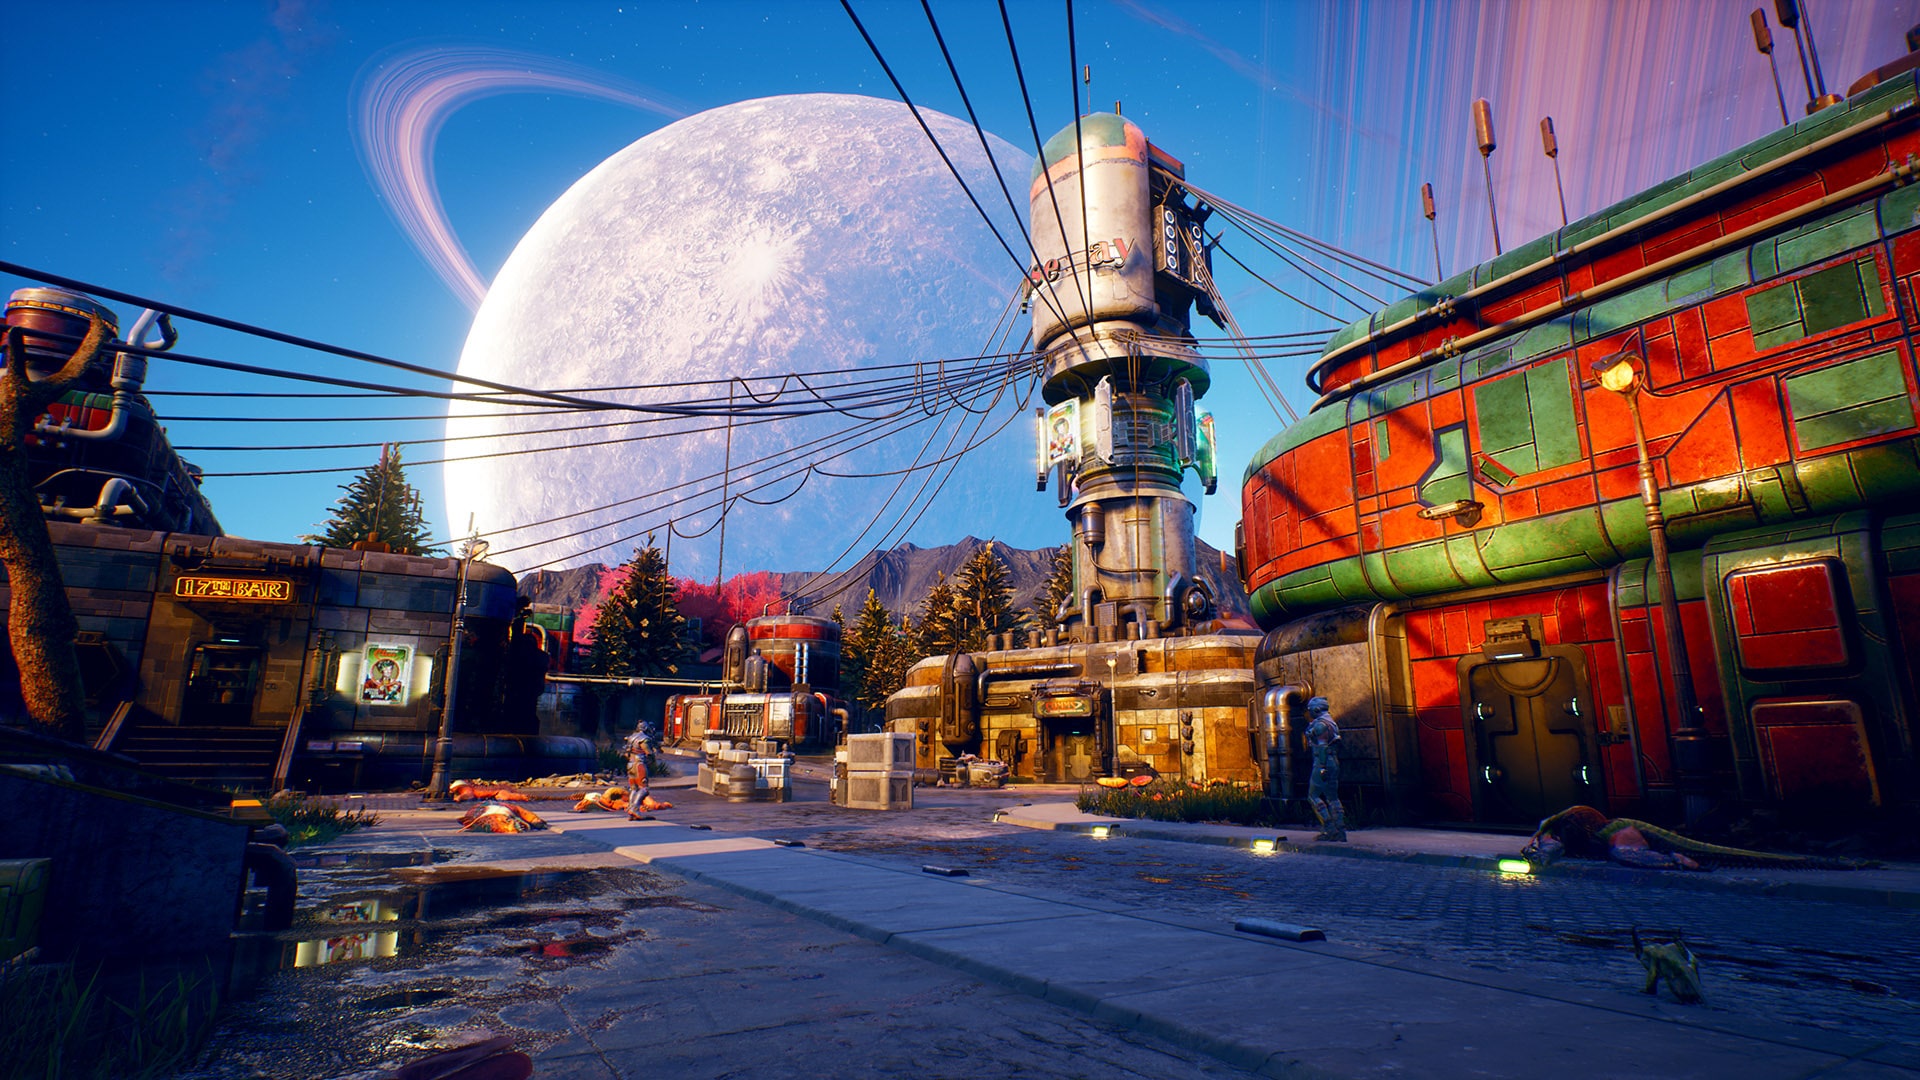 The Outer Worlds - PS4 & PS5 Games